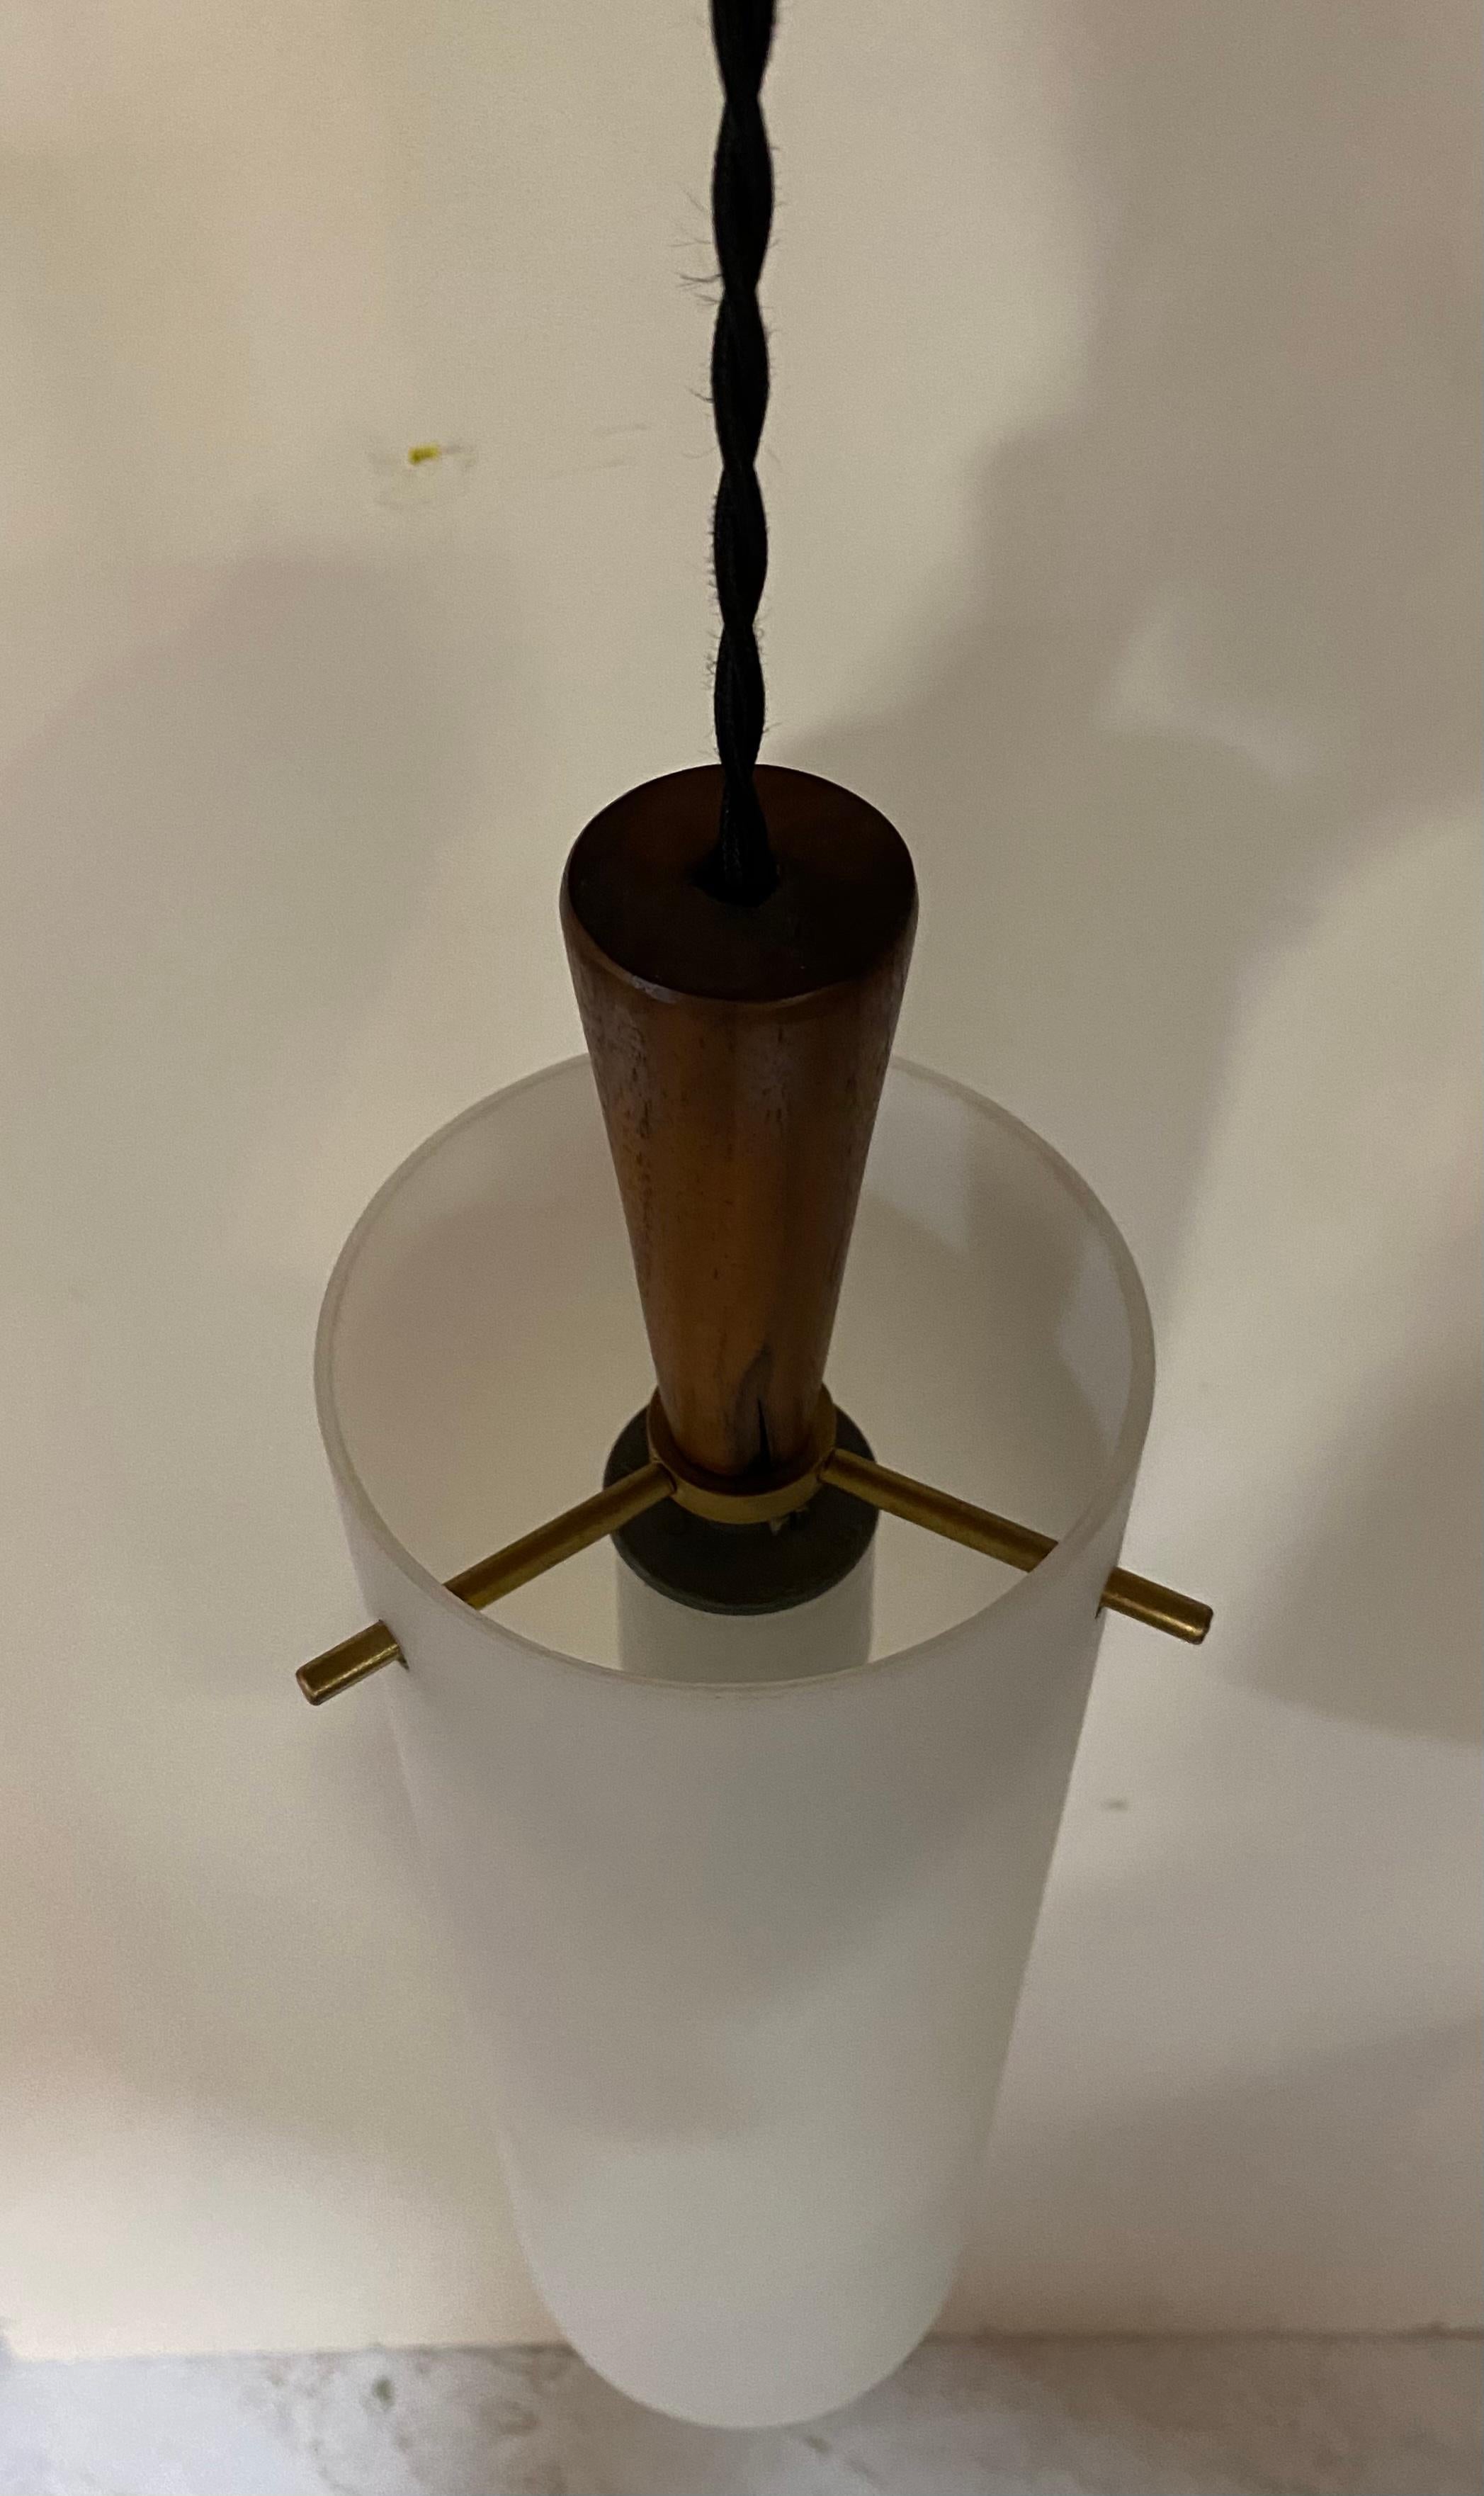 A light fixture by Hadeland Glasswverk of Norway, featuring a frosted glass cylindrical shade complemented by brass pin holders and walnut cap, circa 1950.

Unsigned but widely documented. Takes one standard US bulb, 60 watts max.

Dimensions: 4